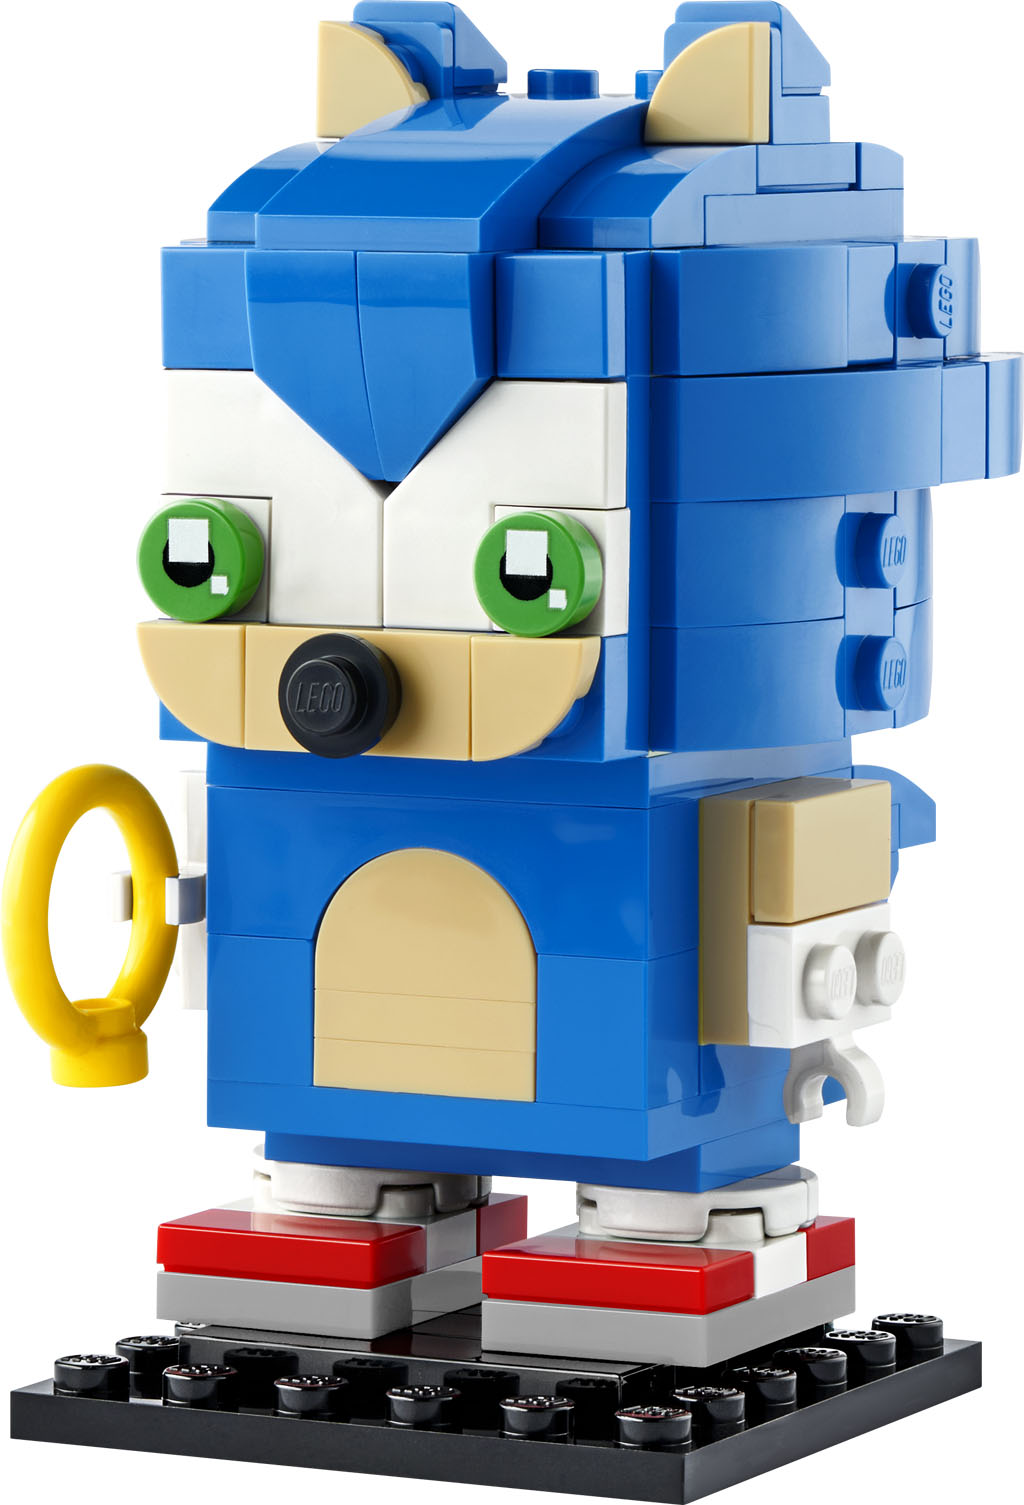 4 New LEGO 'Sonic The Hedgehog' Sets Unveiled For 2023